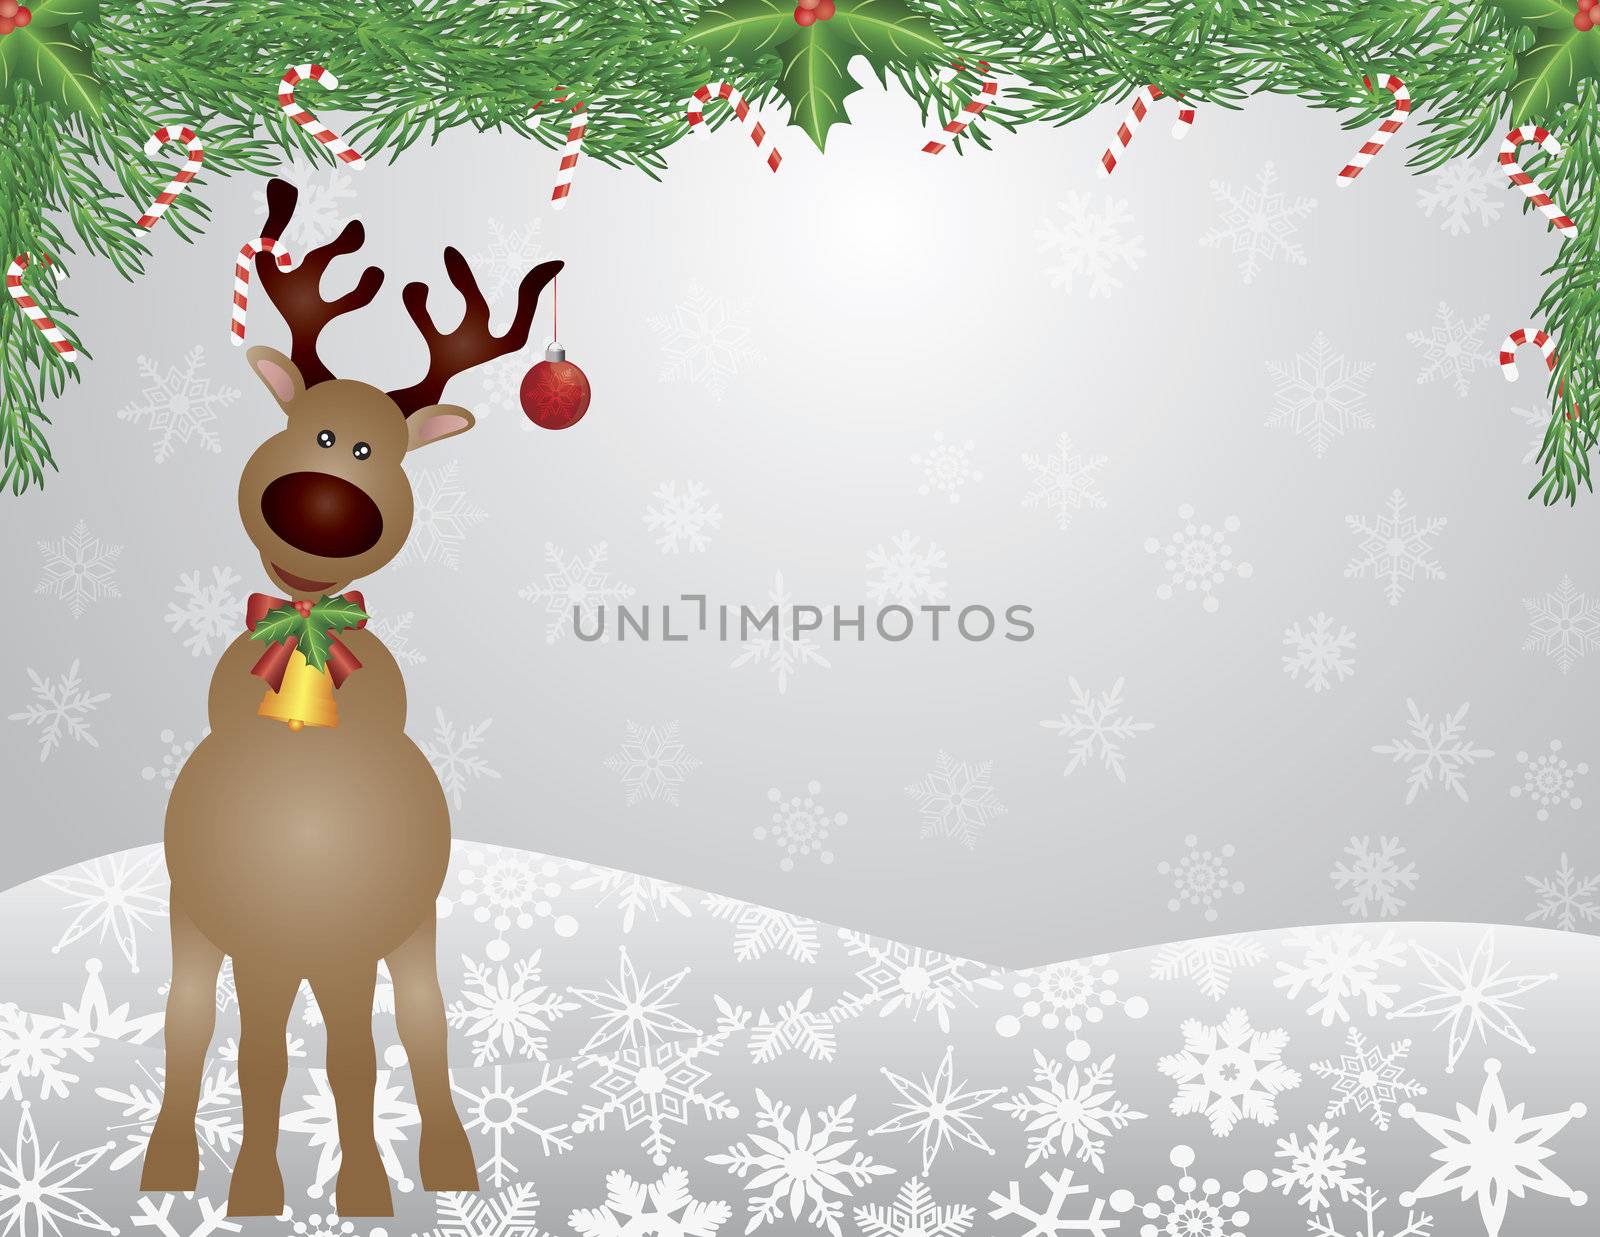 Santa Reindeer with Bow Holly Christmas Ornament with and Garland with Candy Cane on Snowflakes Background Illustration